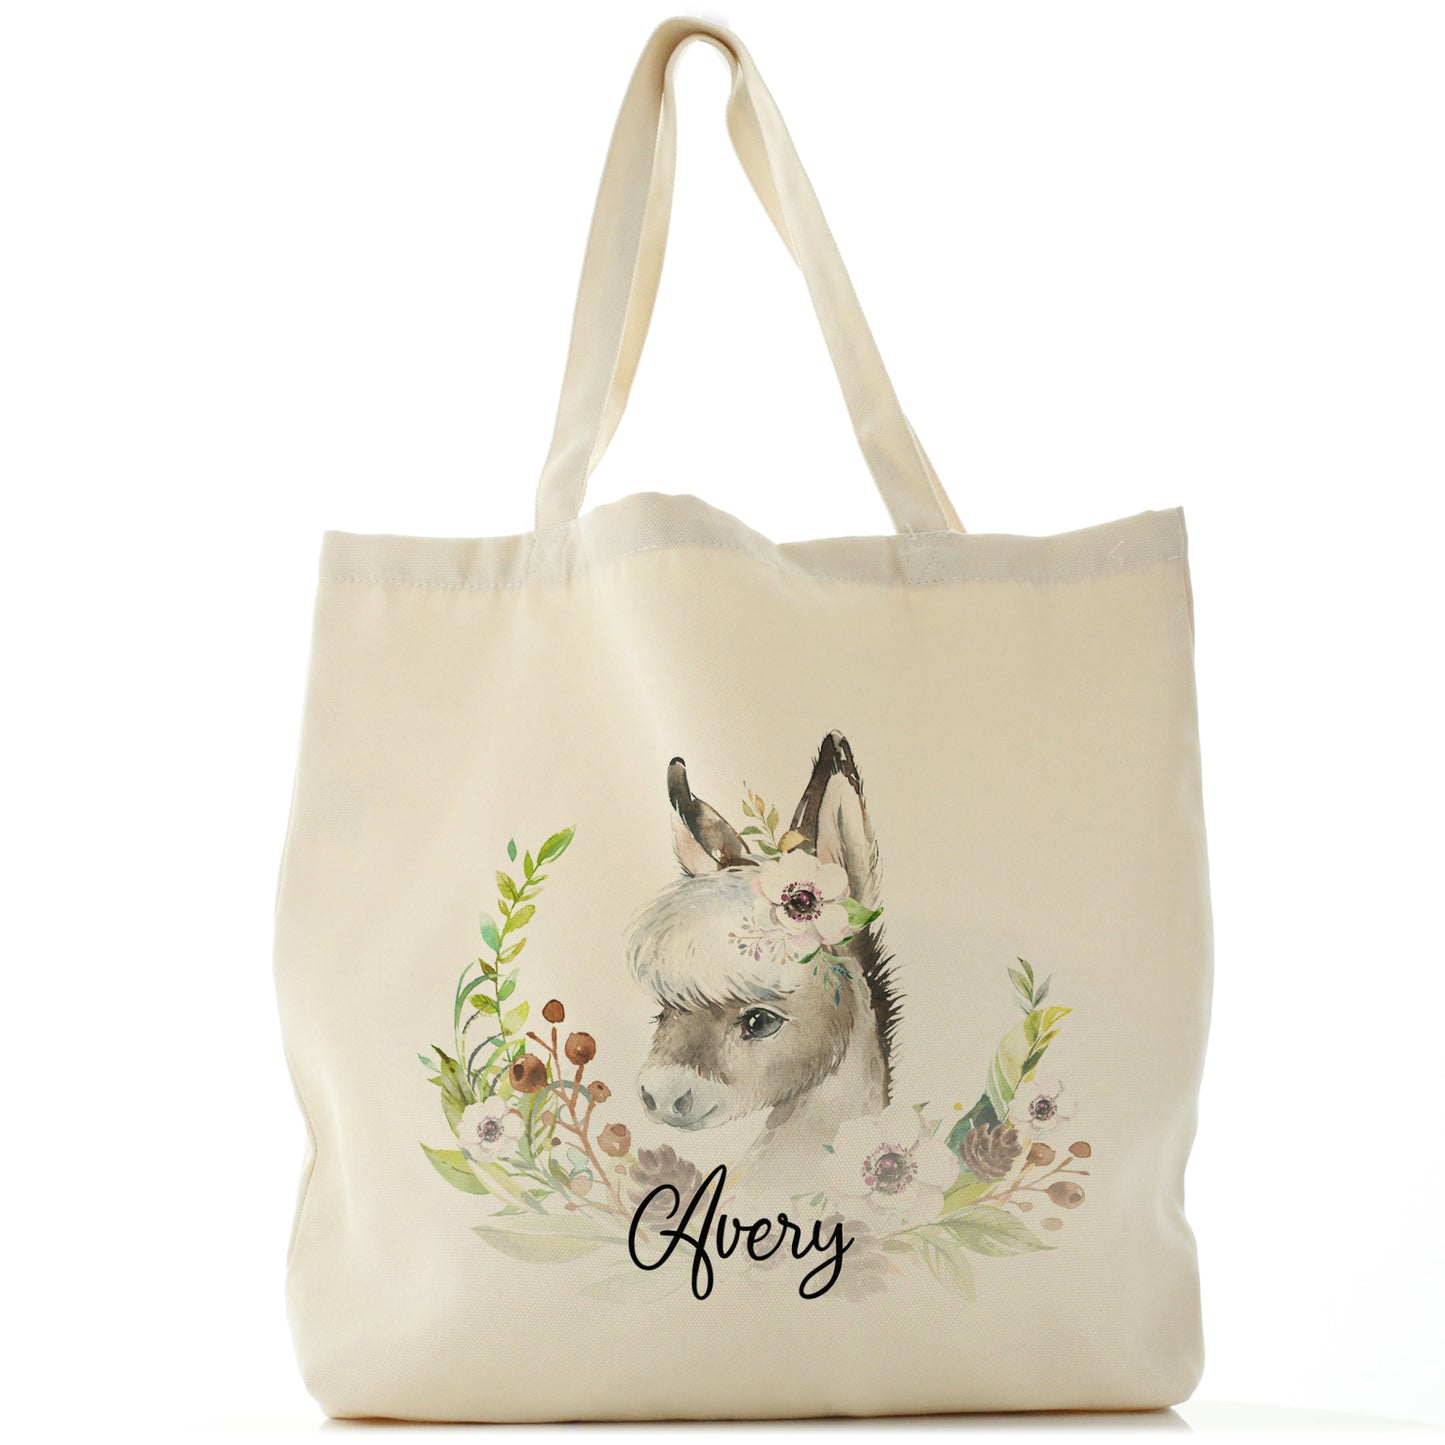 Personalised Canvas Tote Bag with Grey Donkey Pink and White Flowers and Cute Text